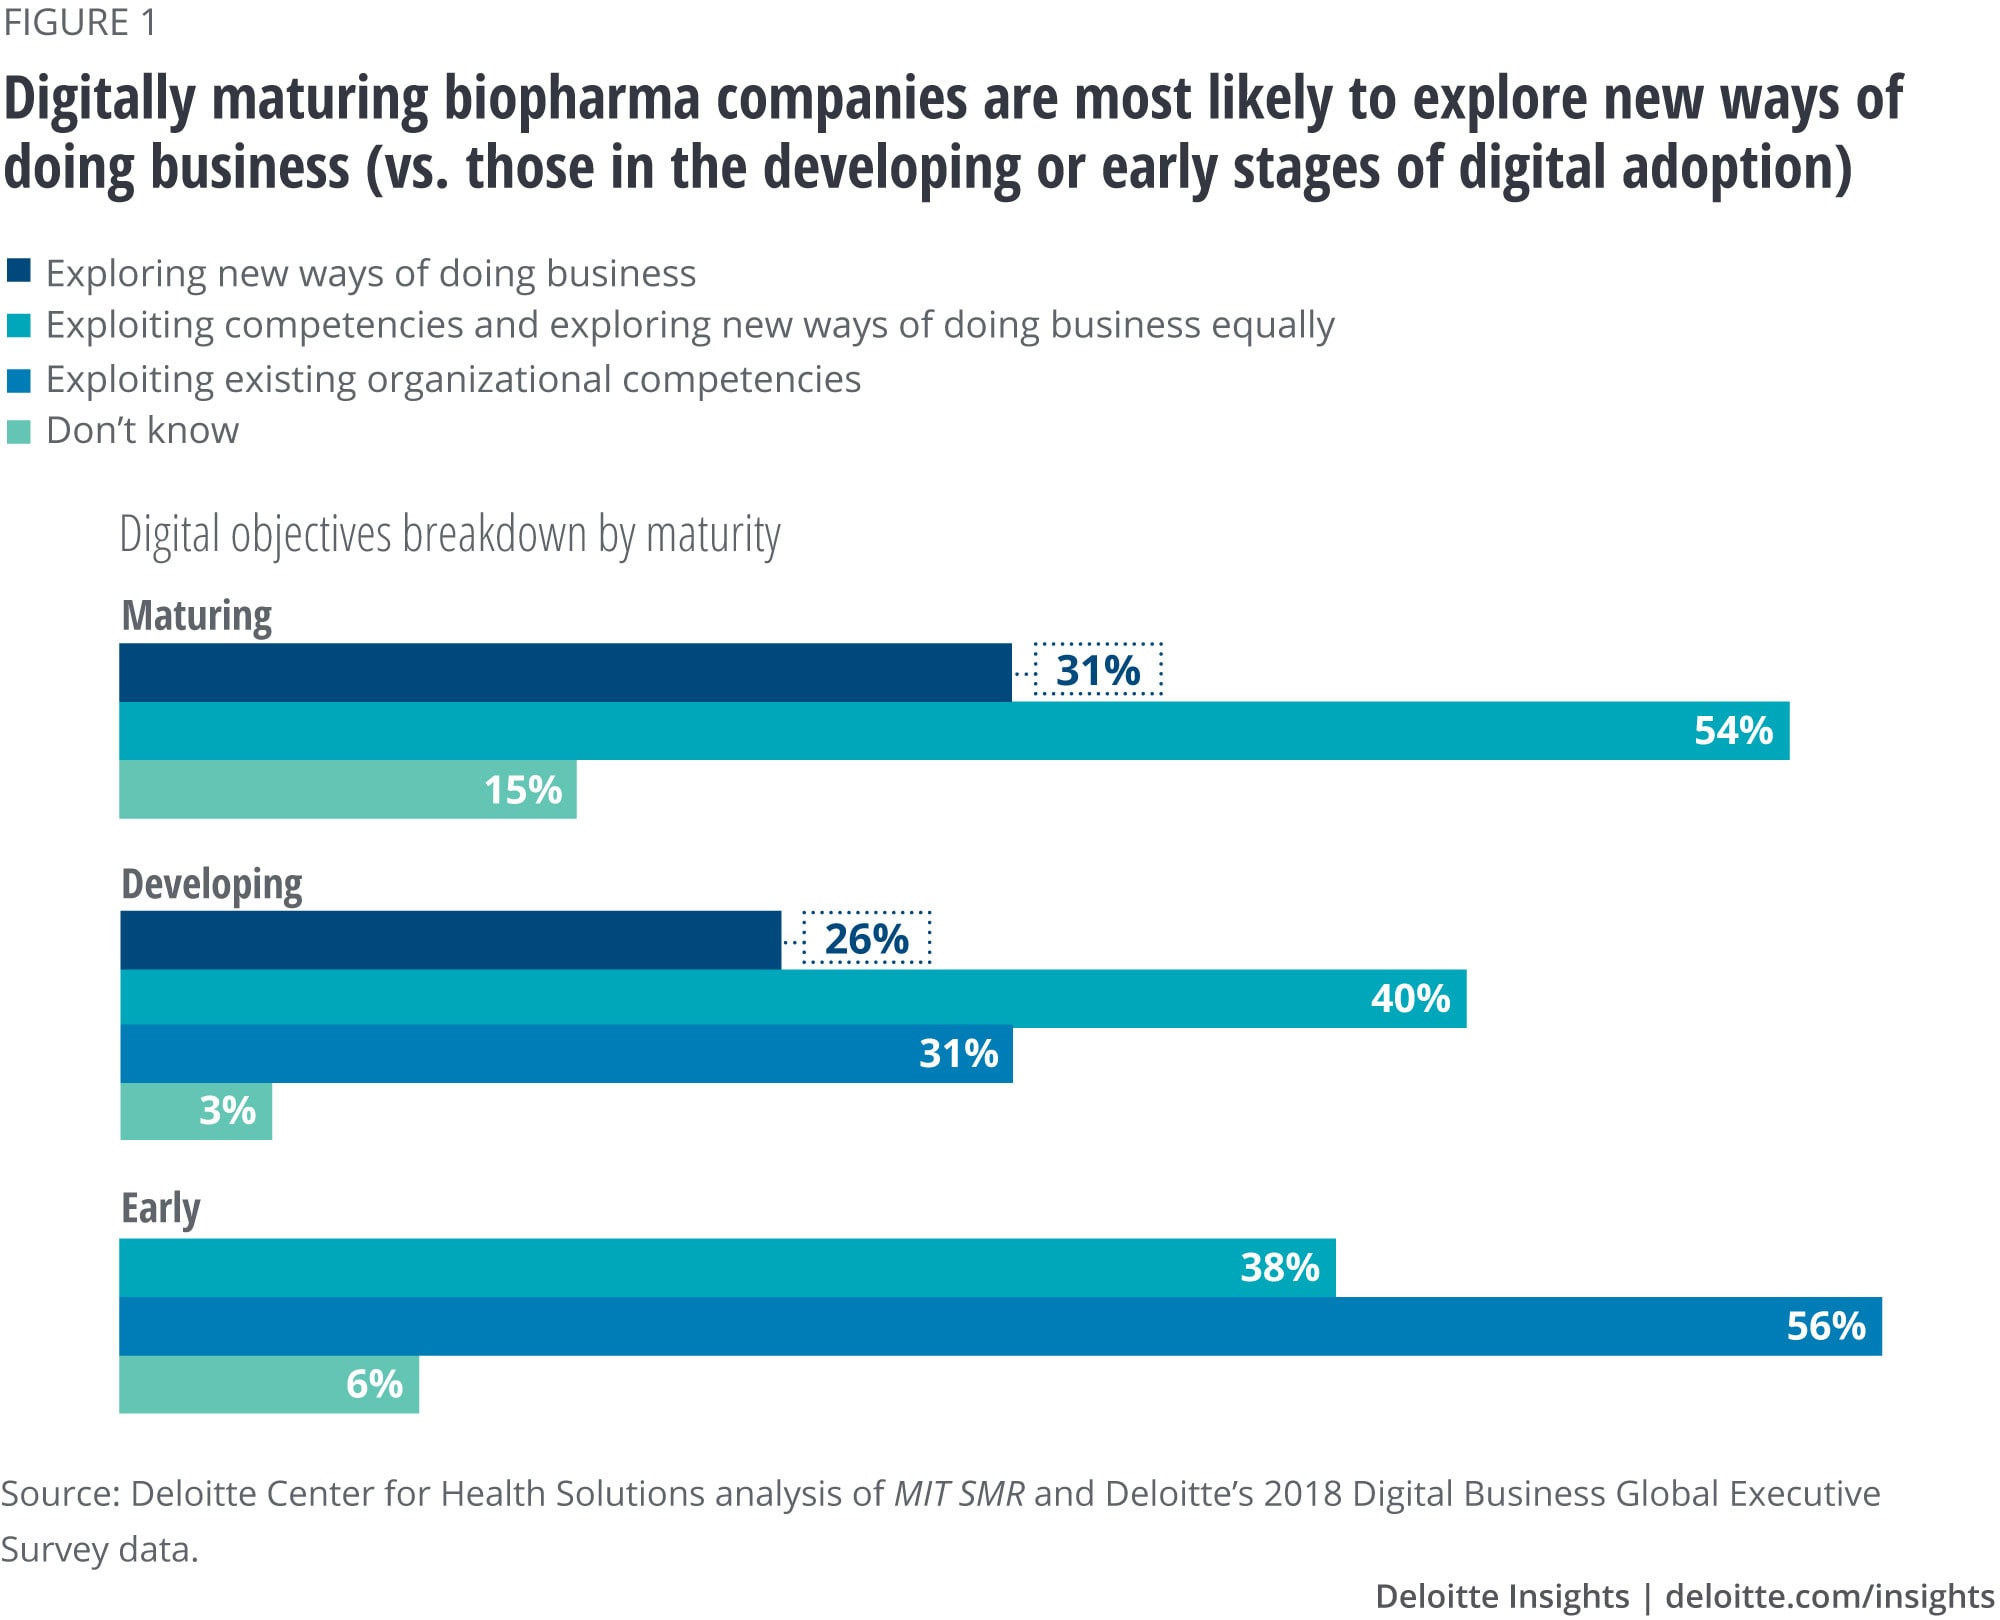 Digitally maturing biopharma companies are most likely to explore new ways of doing business (vs. those in the developing or early stages of digital adoption)